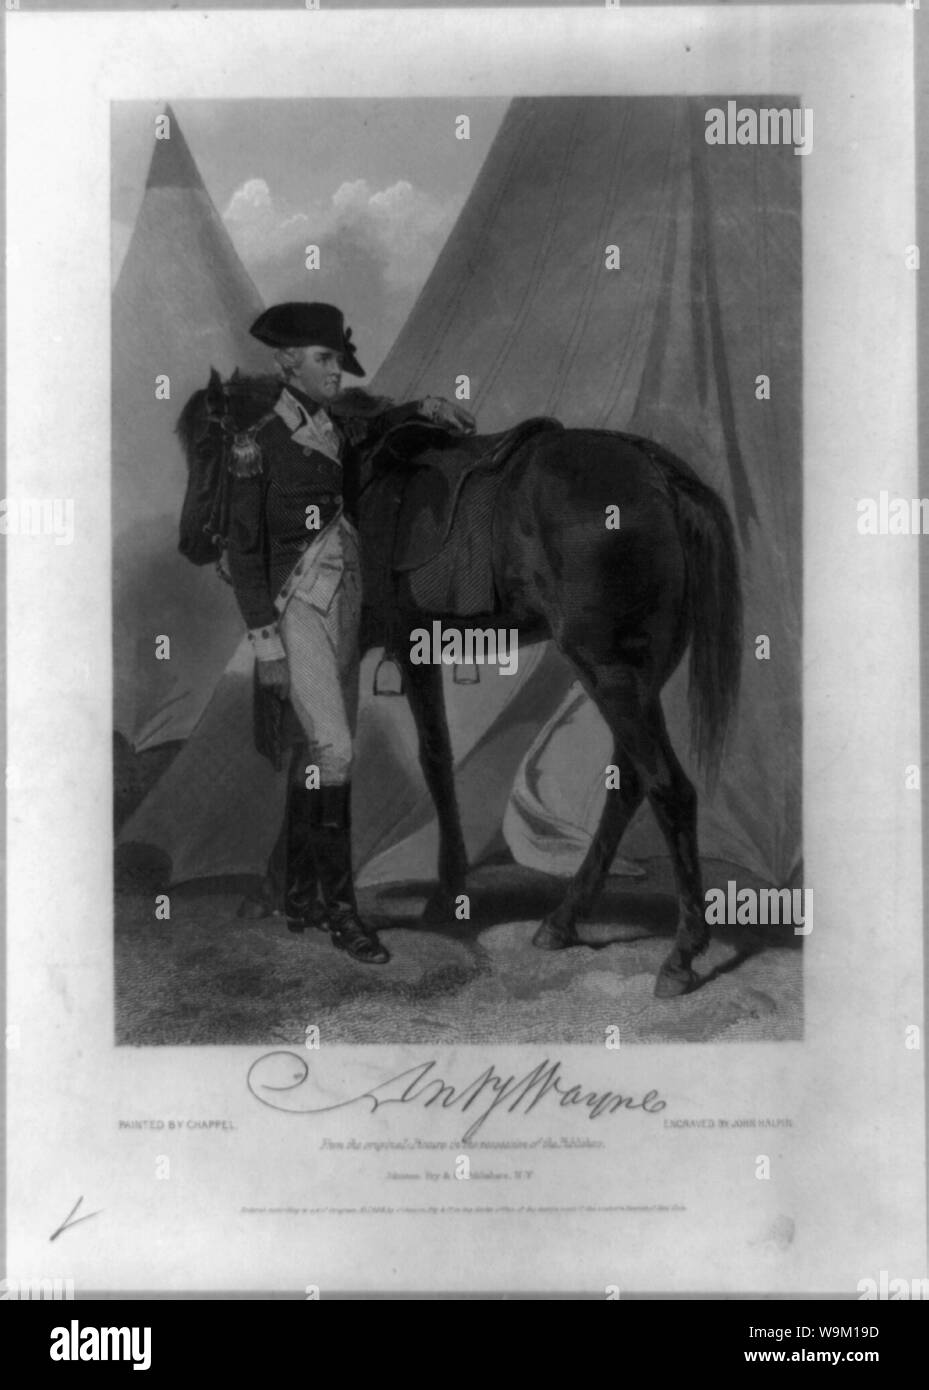 Anthony Wayne, full-length portrait, standing in uniform with horse in front of tents, facing right] / painted by Chappel ; engraved by John Halpin Stock Photo